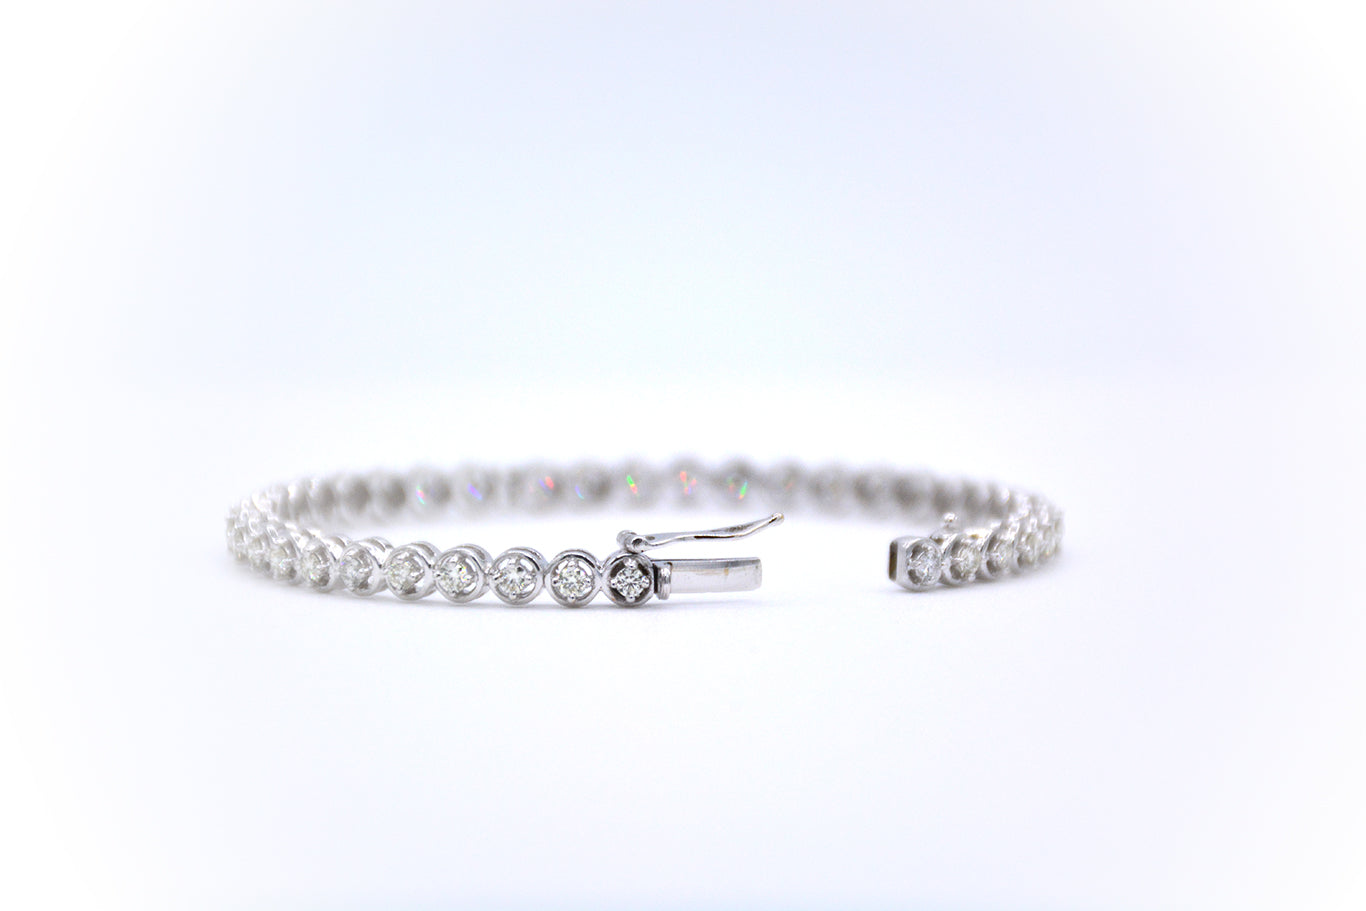 18K White gold oval bracelet with push clasp and 5.53ct T.W diamonds.